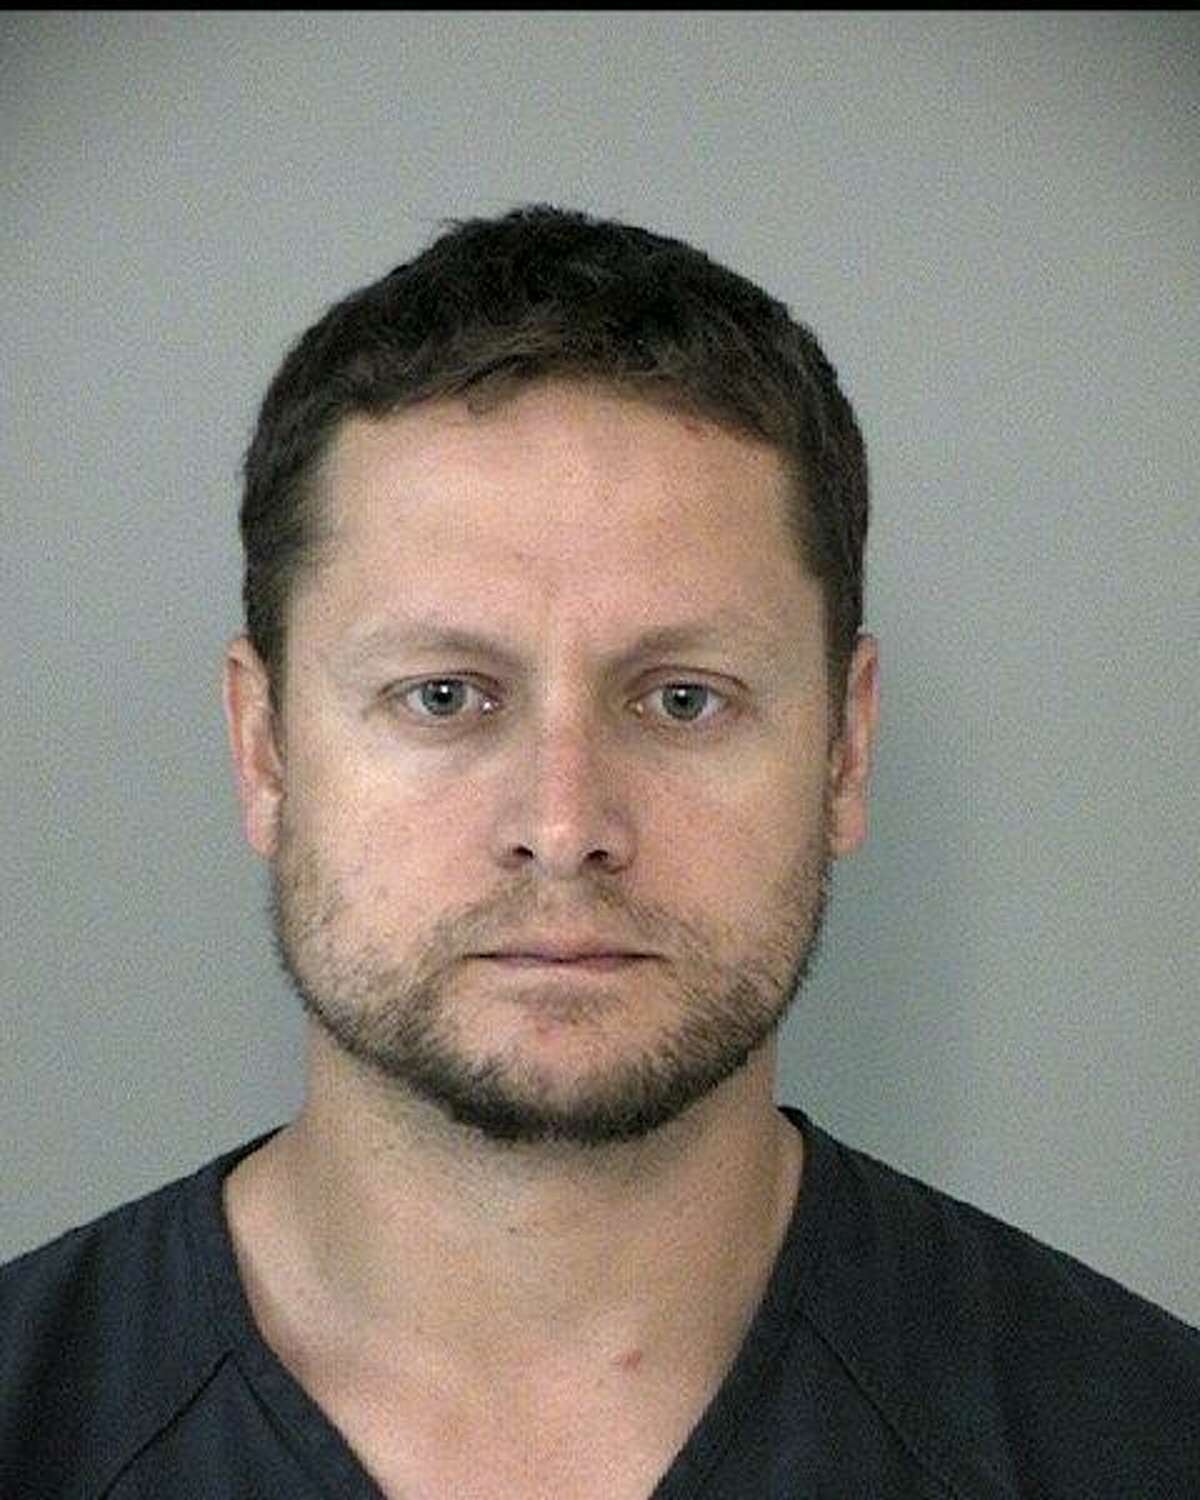 A Katy ISD employee has been arrested and charged with possession of child pornography on a personal device. Bradley Britton, a Seven Lakes High School employee, was charged with the offenses by Katy ISD police, according to a May 24 letter to parents and staff.